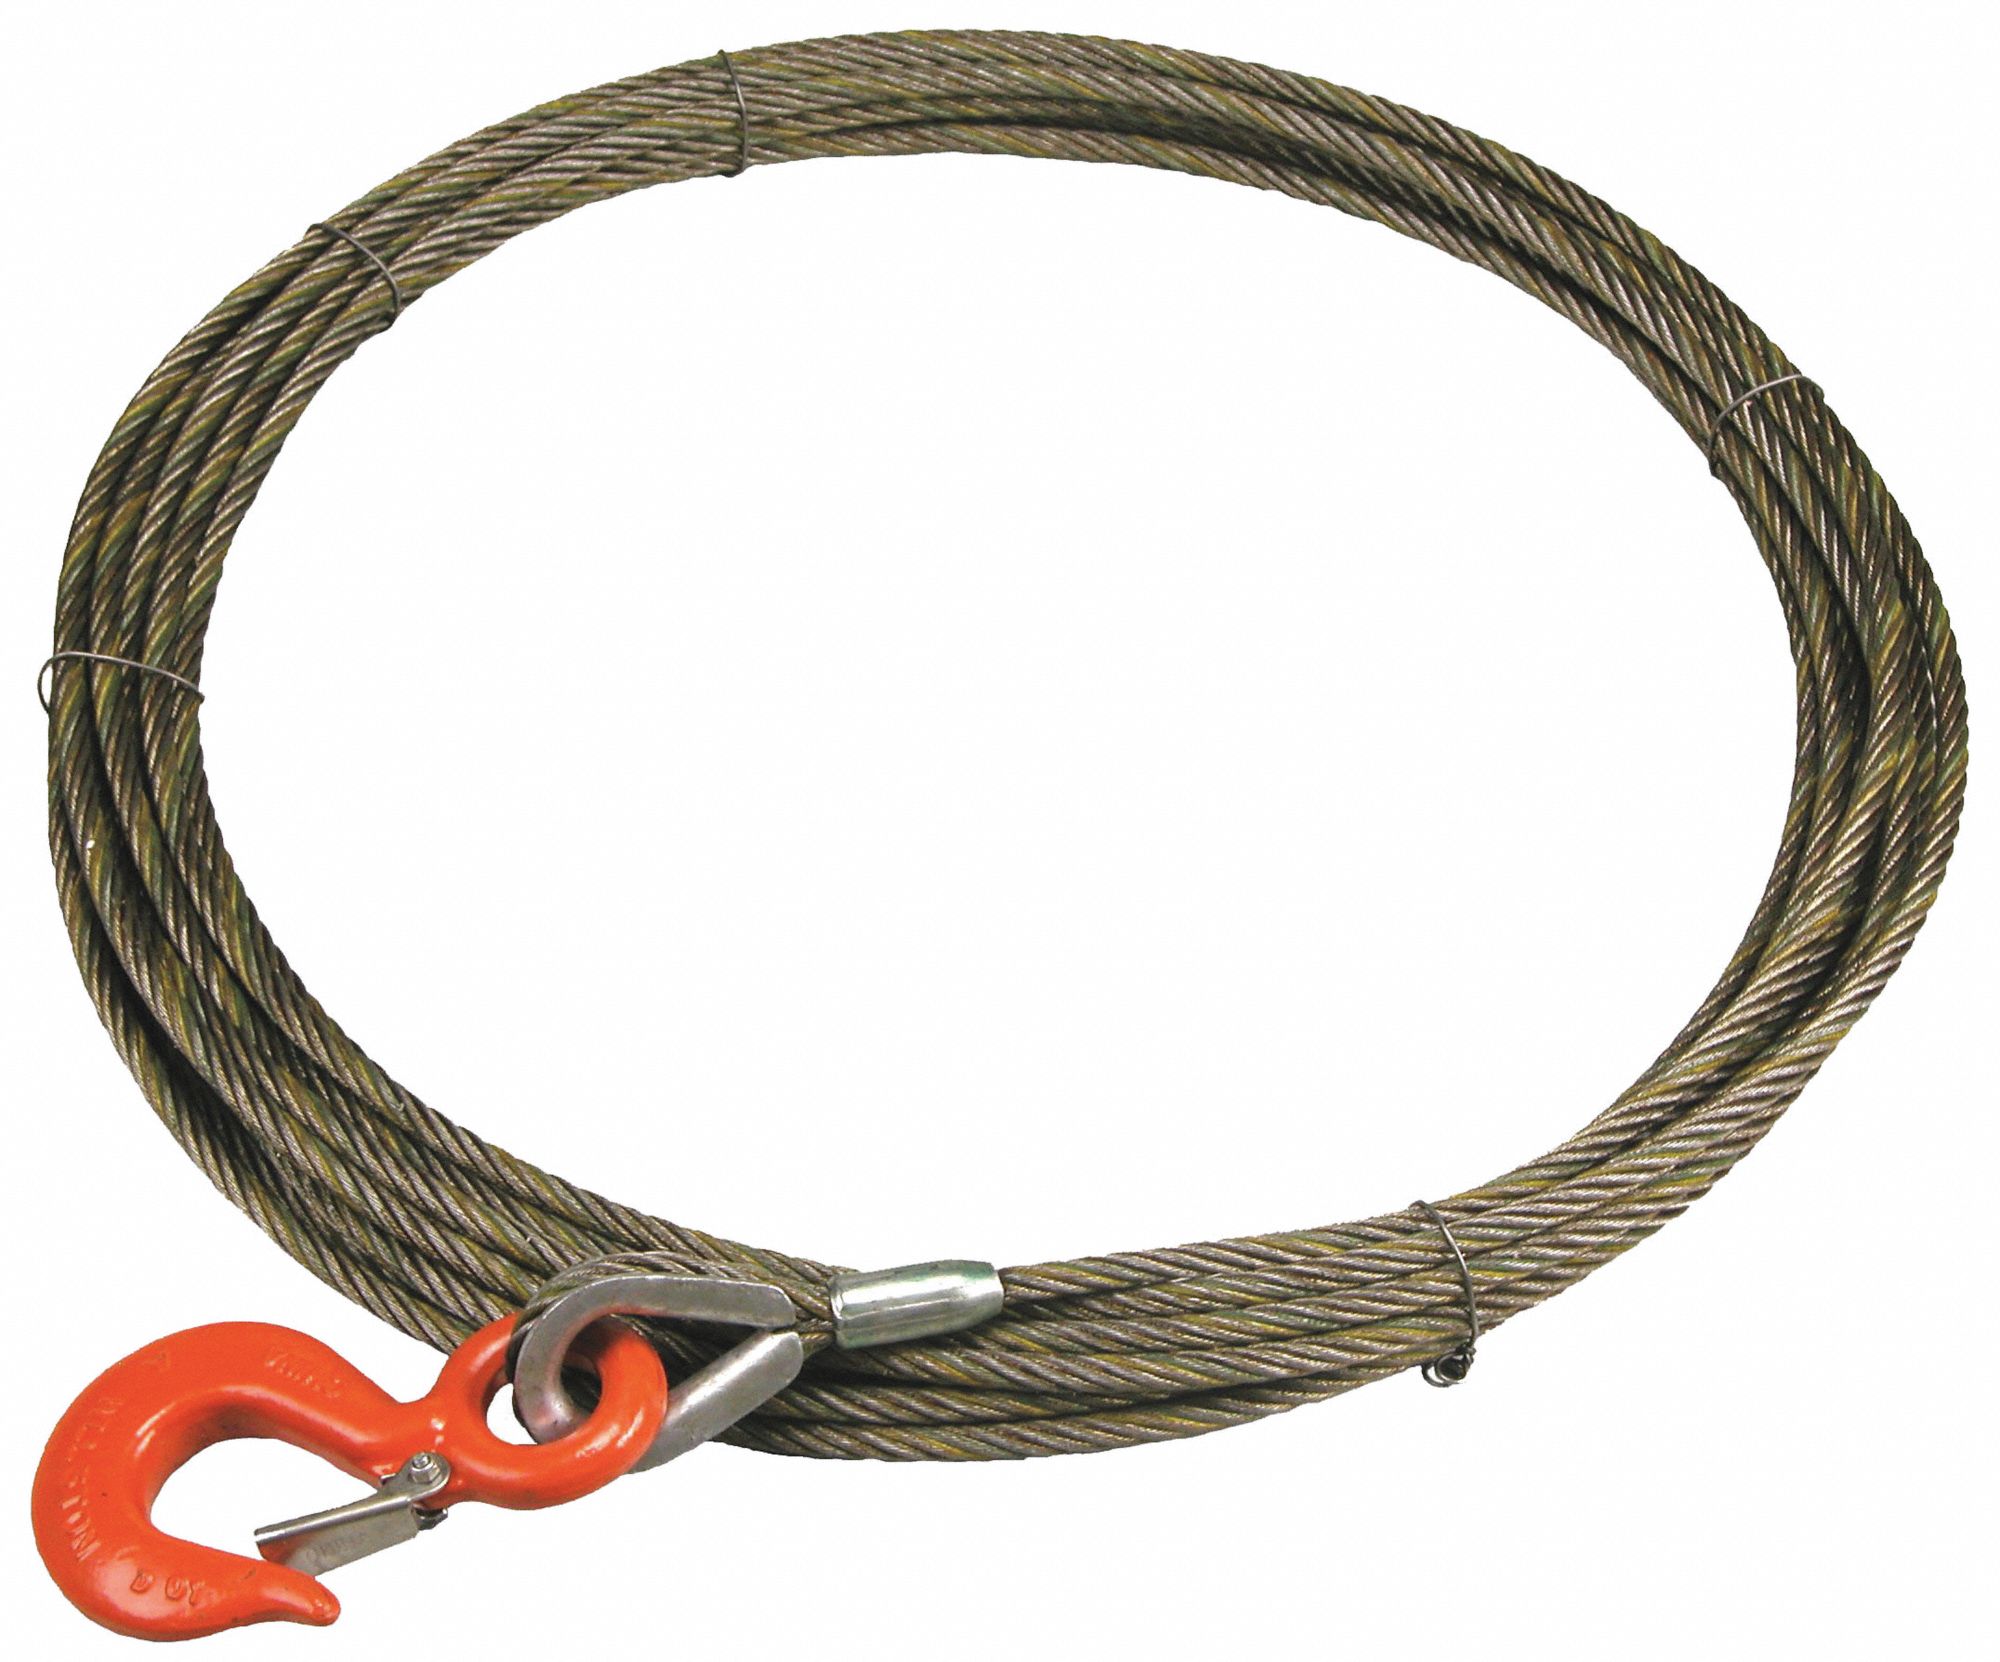 7/16 x 100 Mophorn Winch Cable 7/16 x 100 Replacement Wire Rope 4400LBS Fiber Core Self Locking Swivel Hook 